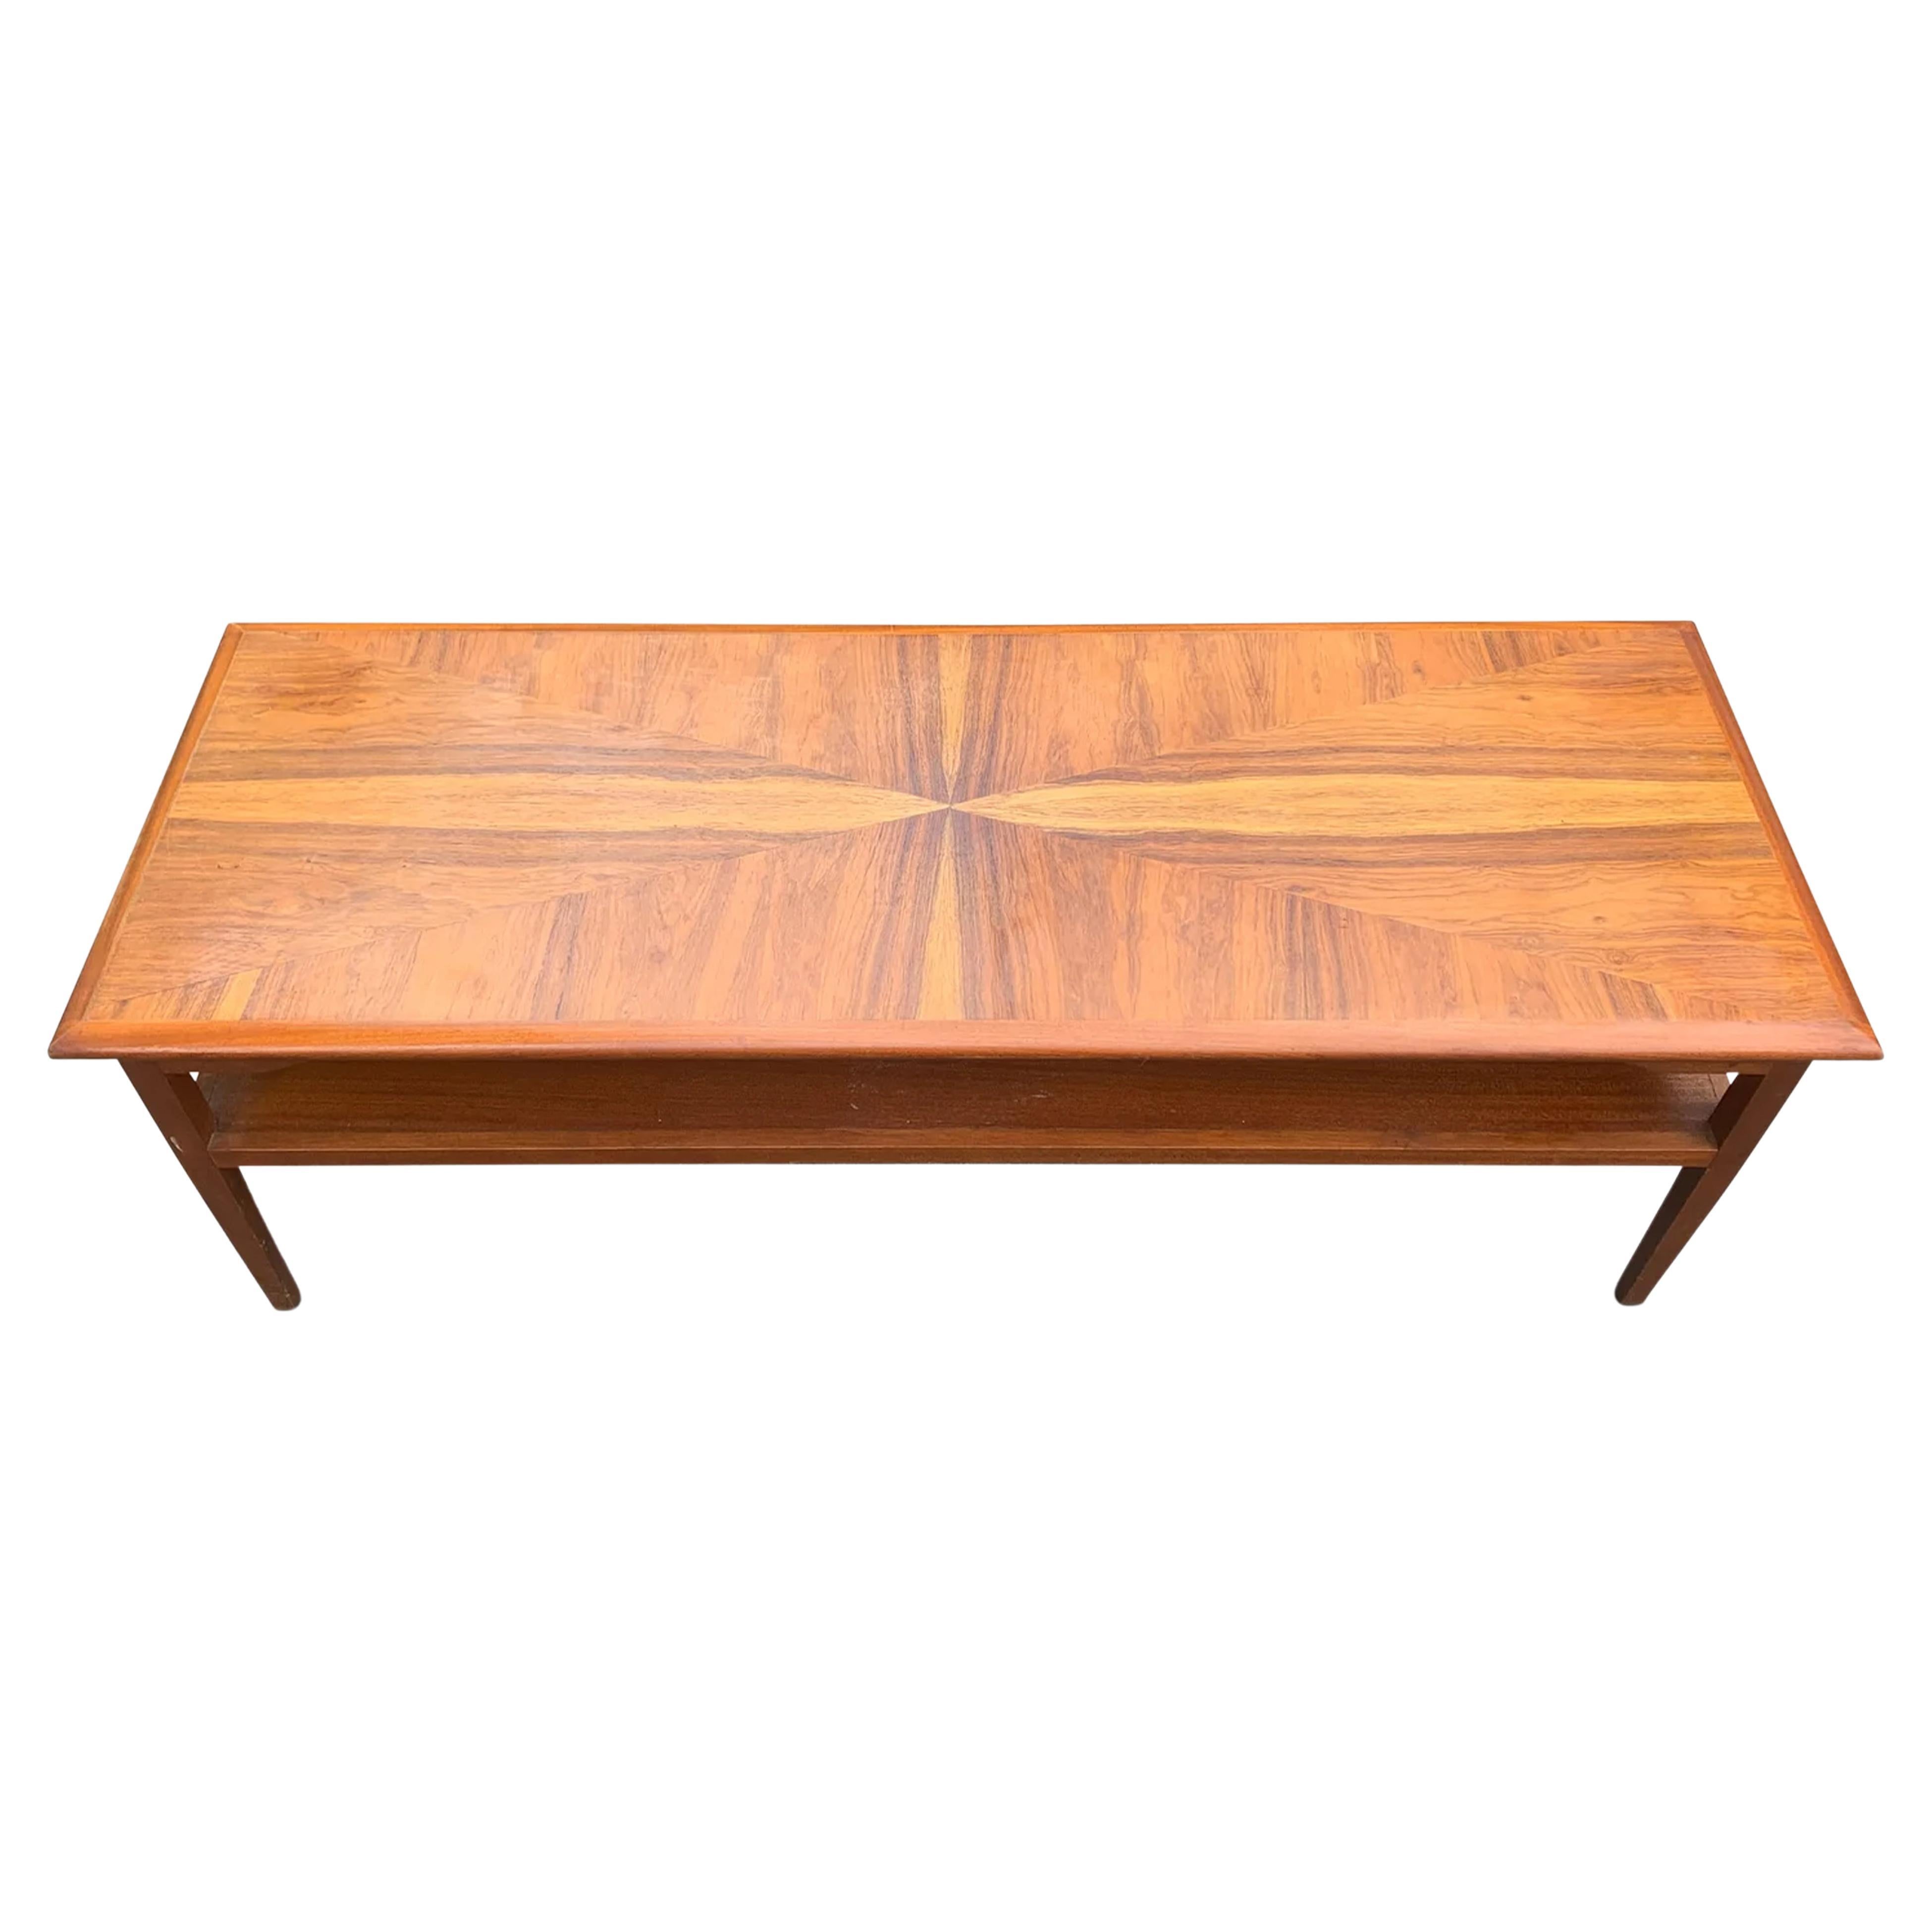 A Danish Mid Century Modern Teak Rectangular  Coffee Table With Magazine Rack Featuring A Sunburst Inlaid Table Top from the 1960's 

An unusual twist on a teak mid century coffee table, with an eye catching sunburst inlaid top.